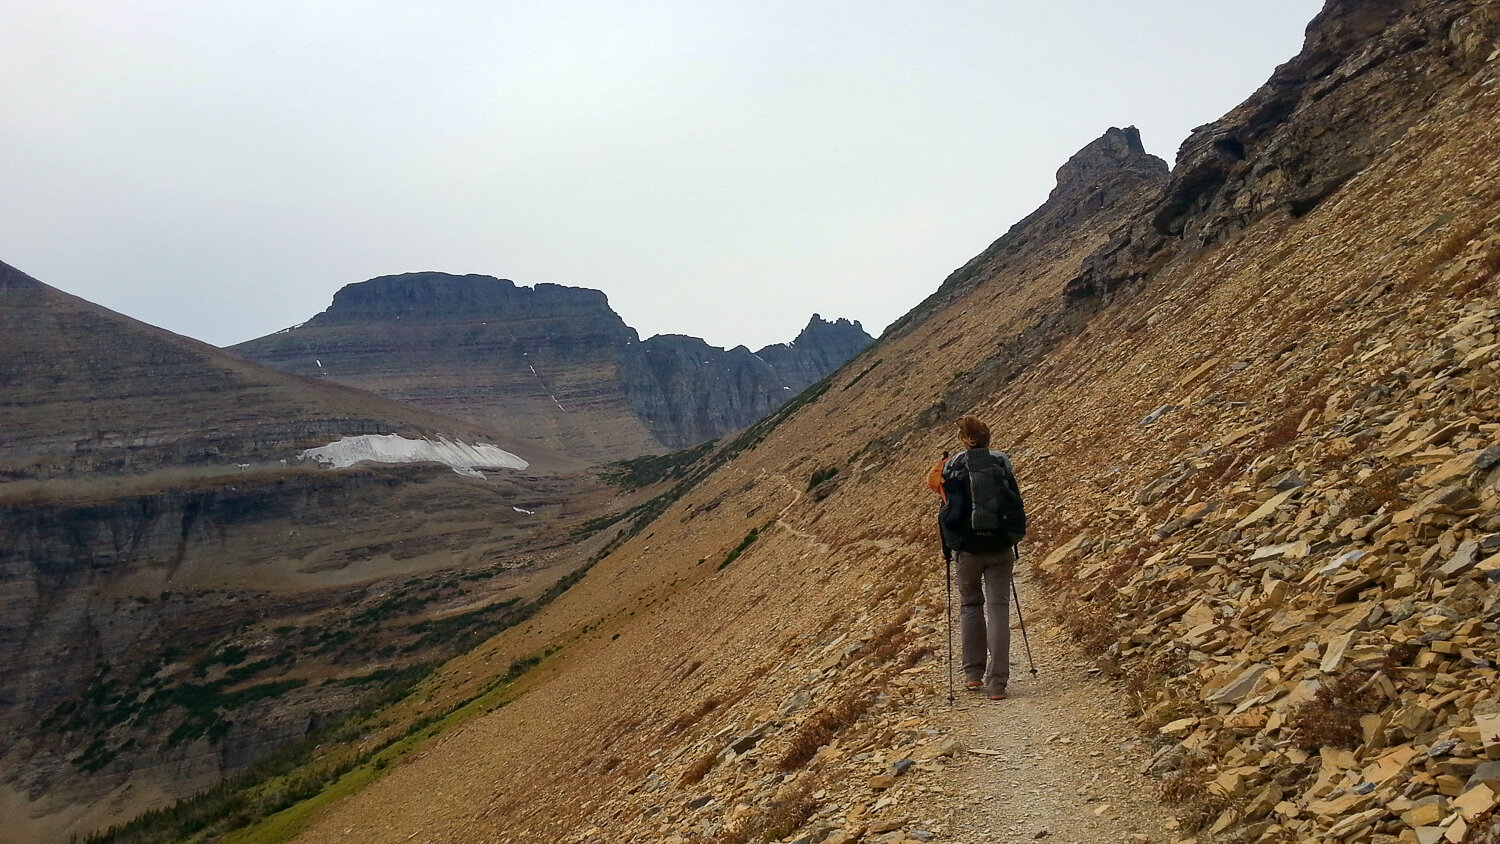 Nearing the end of our northbound thru-hike in Glacier National Park